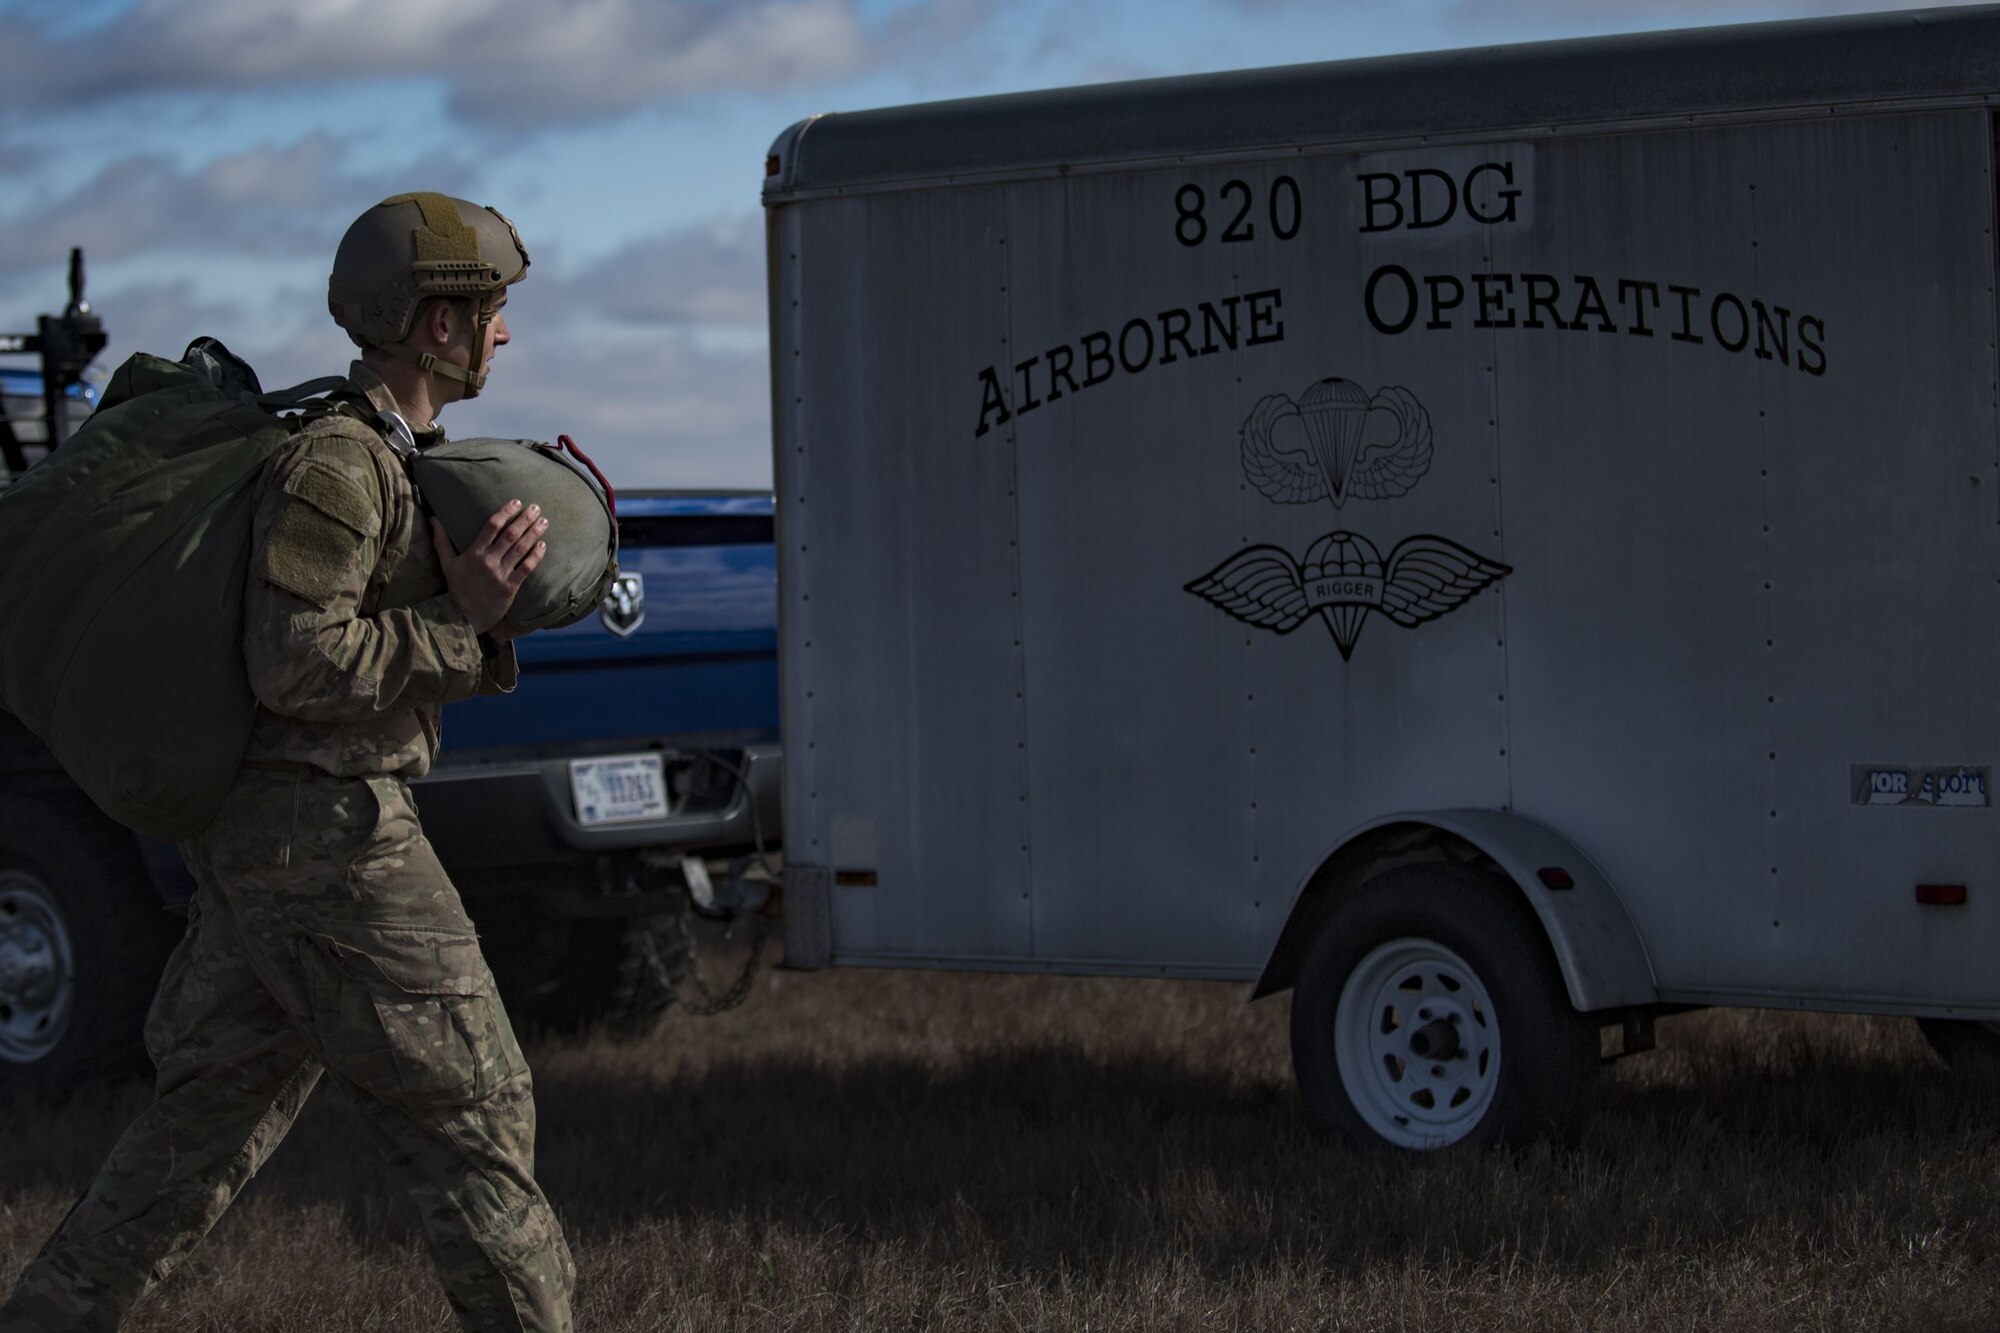 Staff Sgt. Richard Murkin, 823th Base Defense Squadron jumpmaster returns his equipment to the Aircrew Flight Equipment section after conducting a static-line jump from an HC-130J Combat King II, Jan. 17, 2018, at the Lee Fulp drop zone in Tifton, Ga. The 820th BDG routinely conducts static-line jumps to maintain qualifications and ensure mission readiness. (U.S. Air Force photo by Senior Airman Daniel Snider)